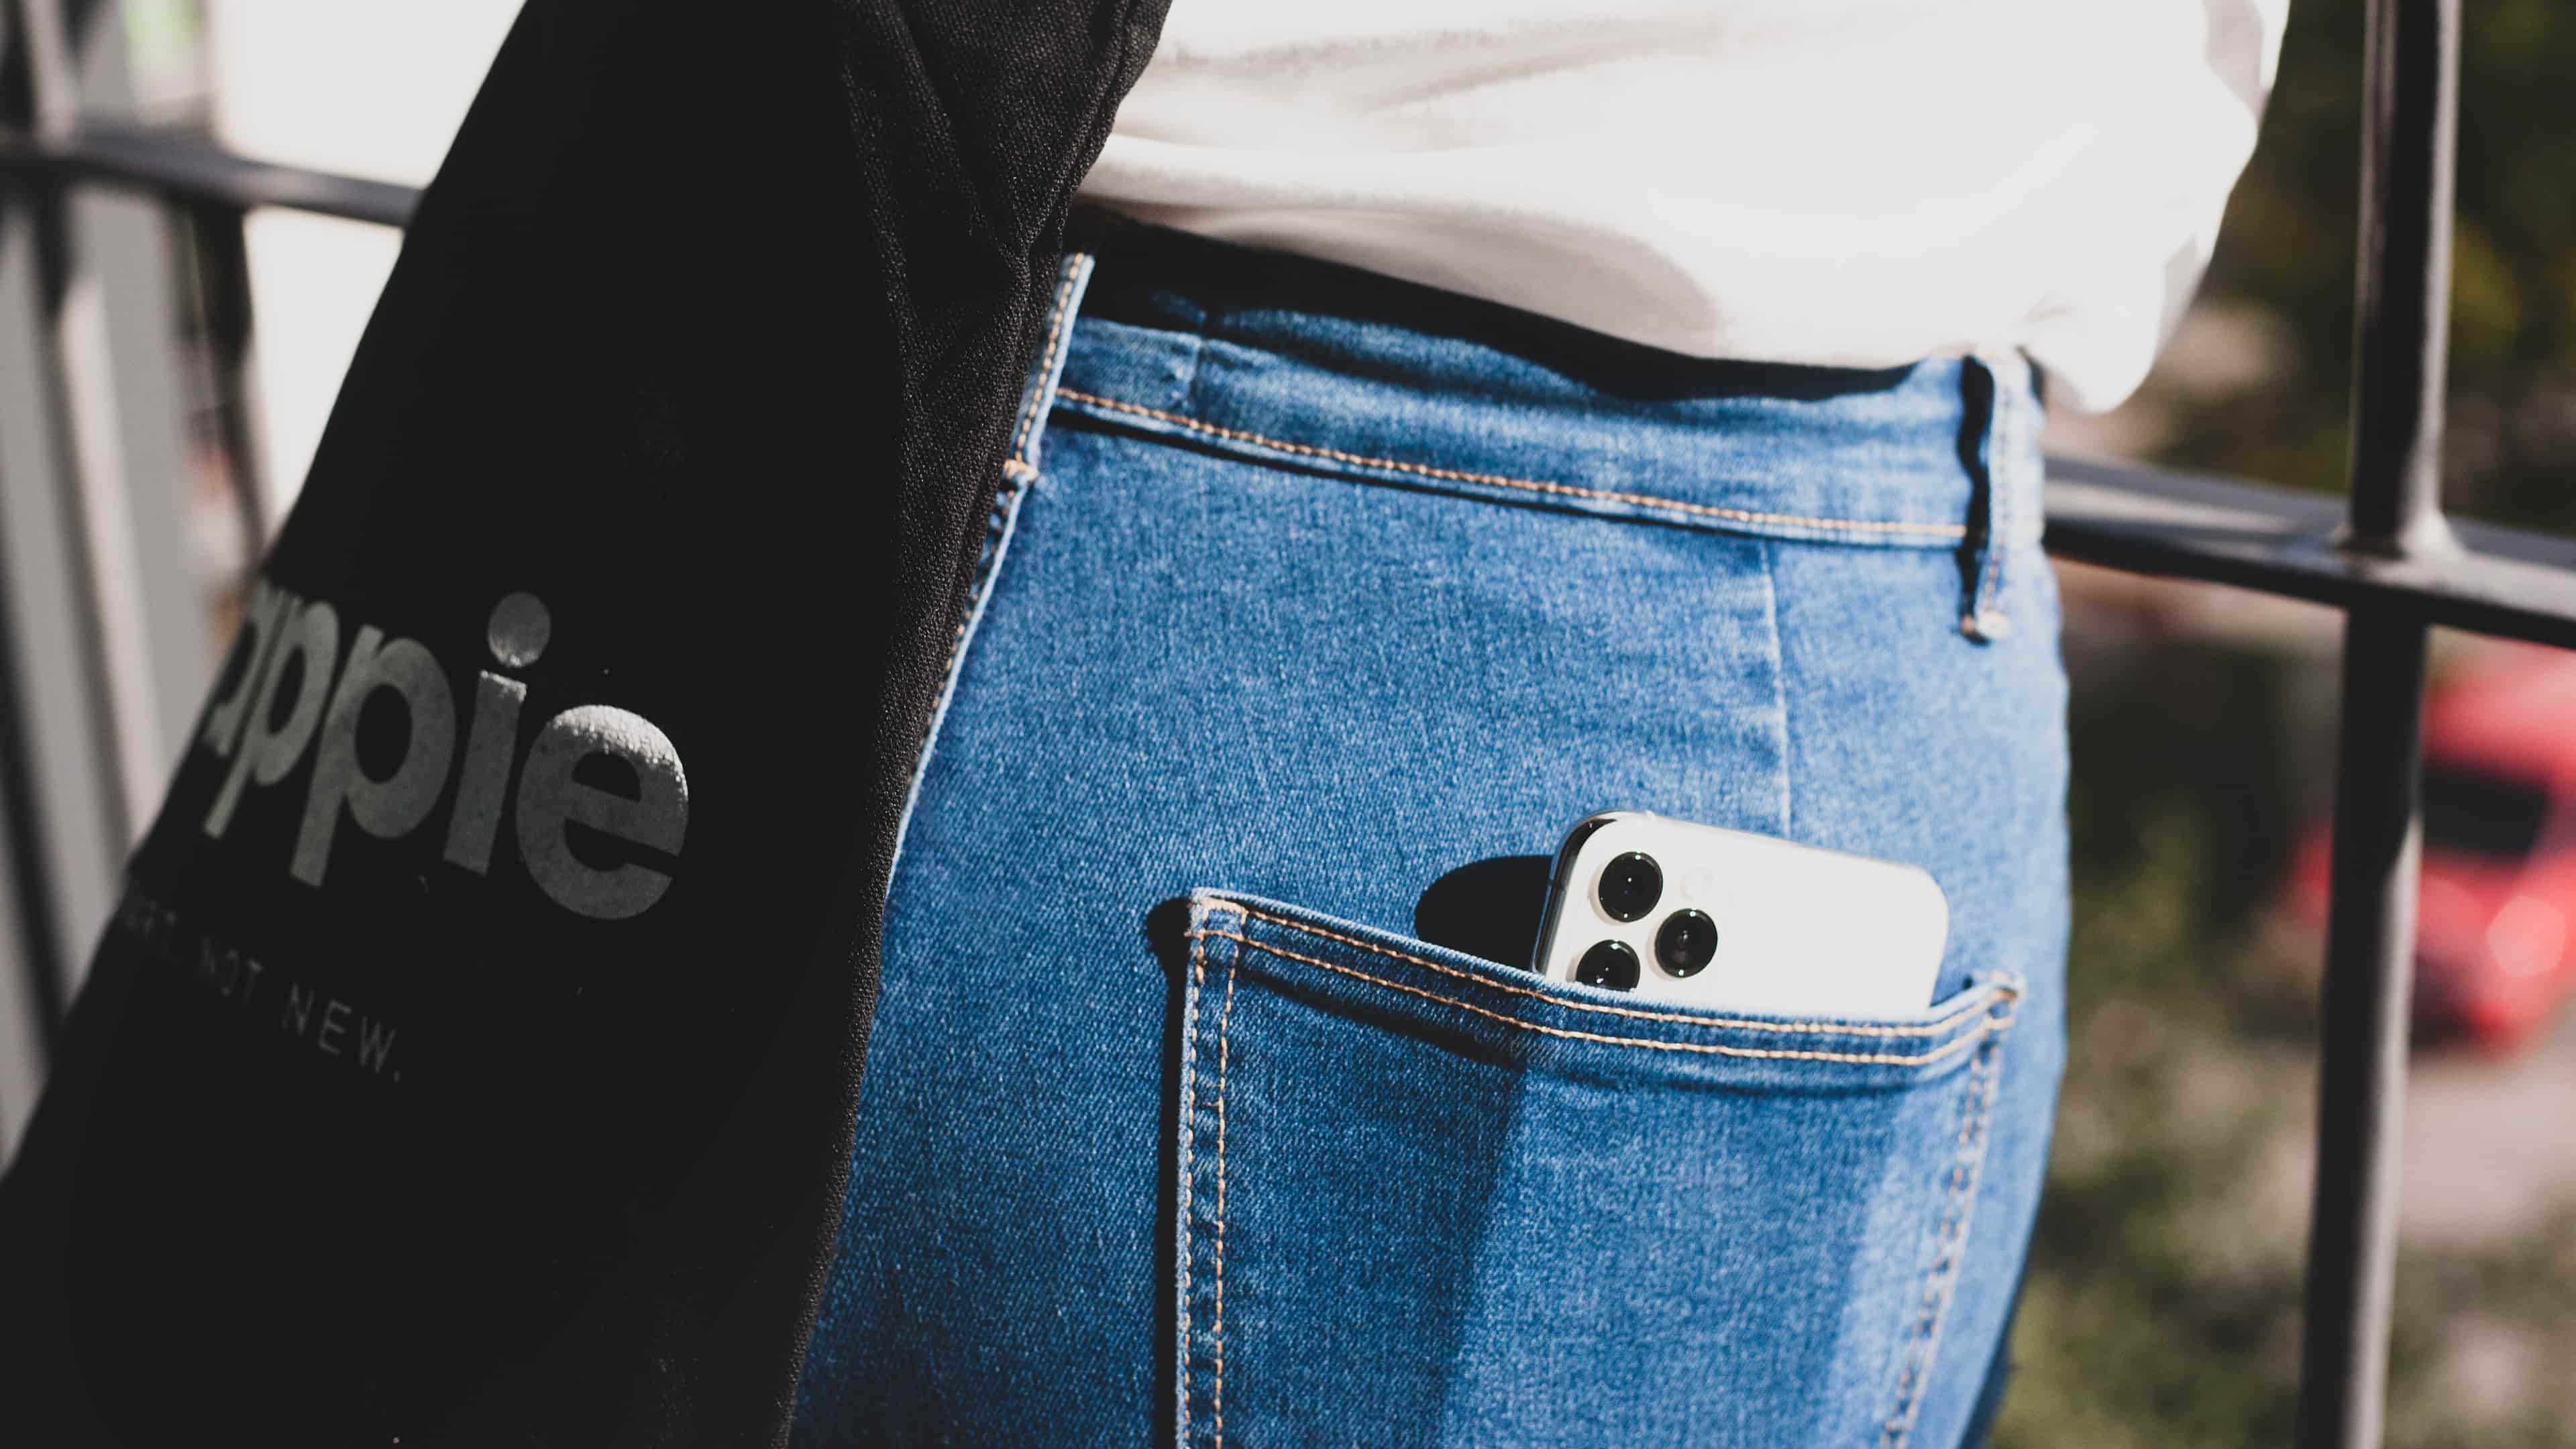 Closeup of a woman's back jeans pocket with a white Apple iPhone 13 Pro inside